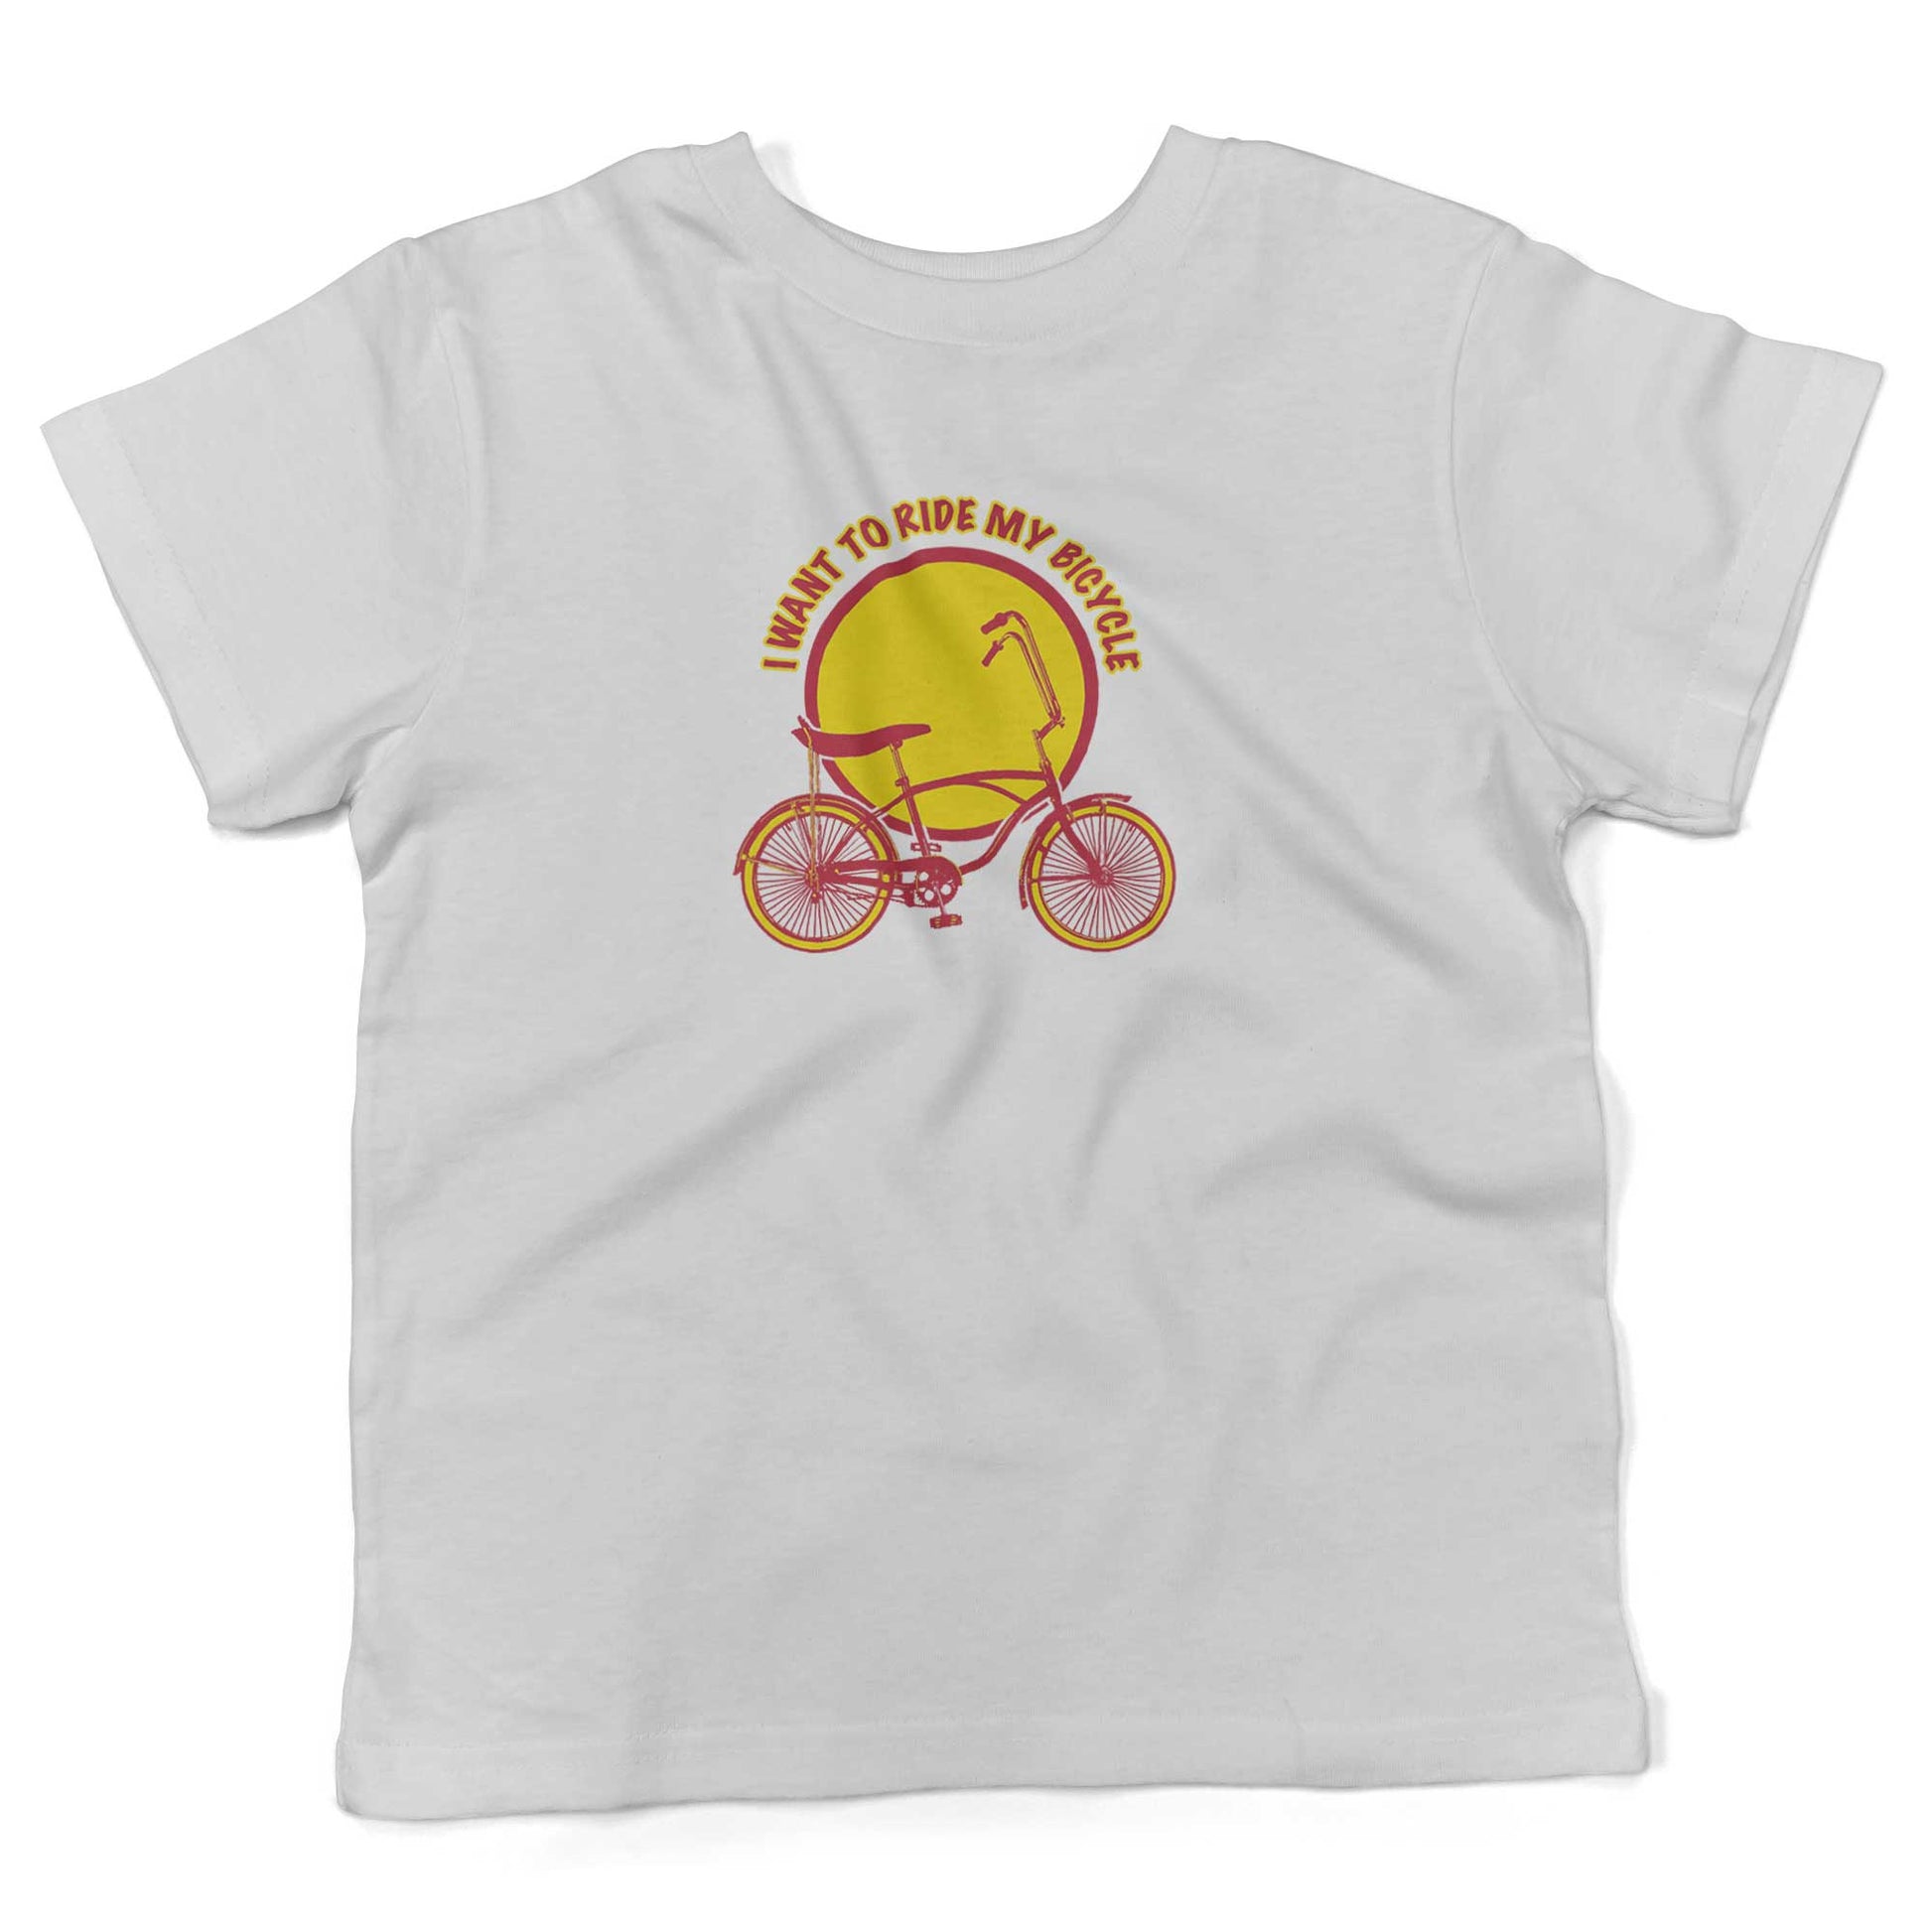 I Want To Ride My Bicycle Toddler Shirt-White-2T